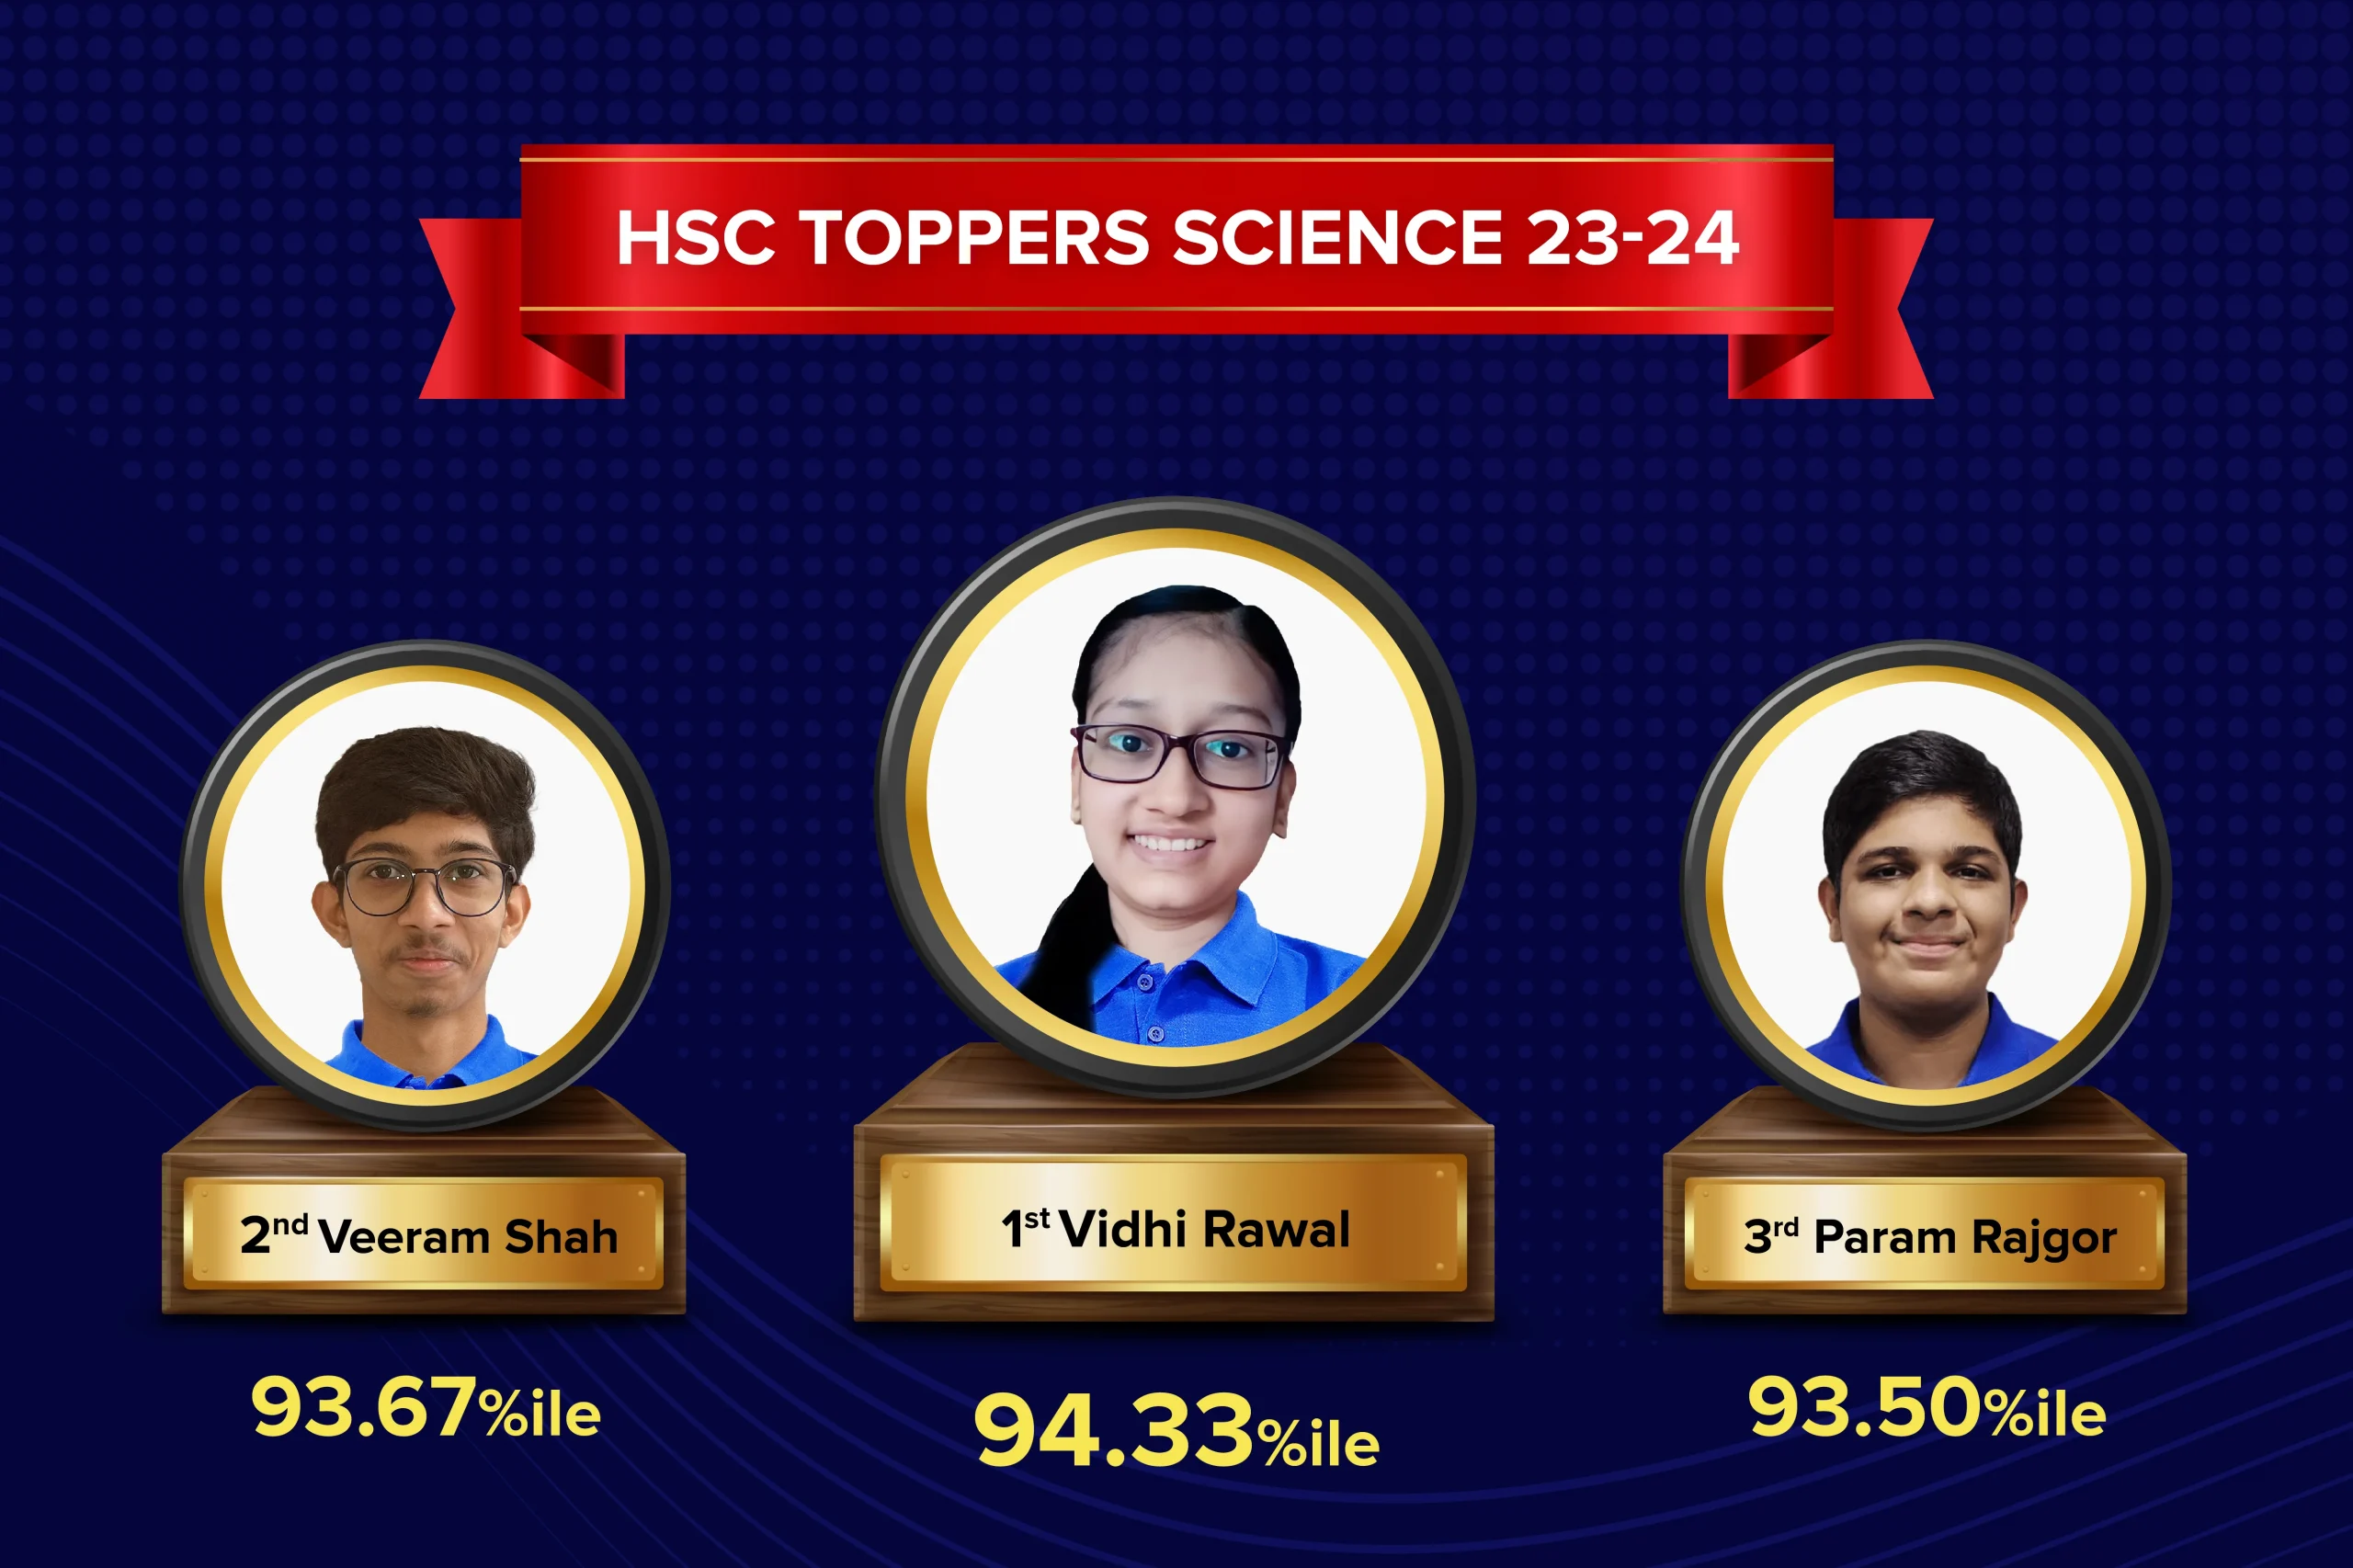 HSC Toppers Science 2023-24